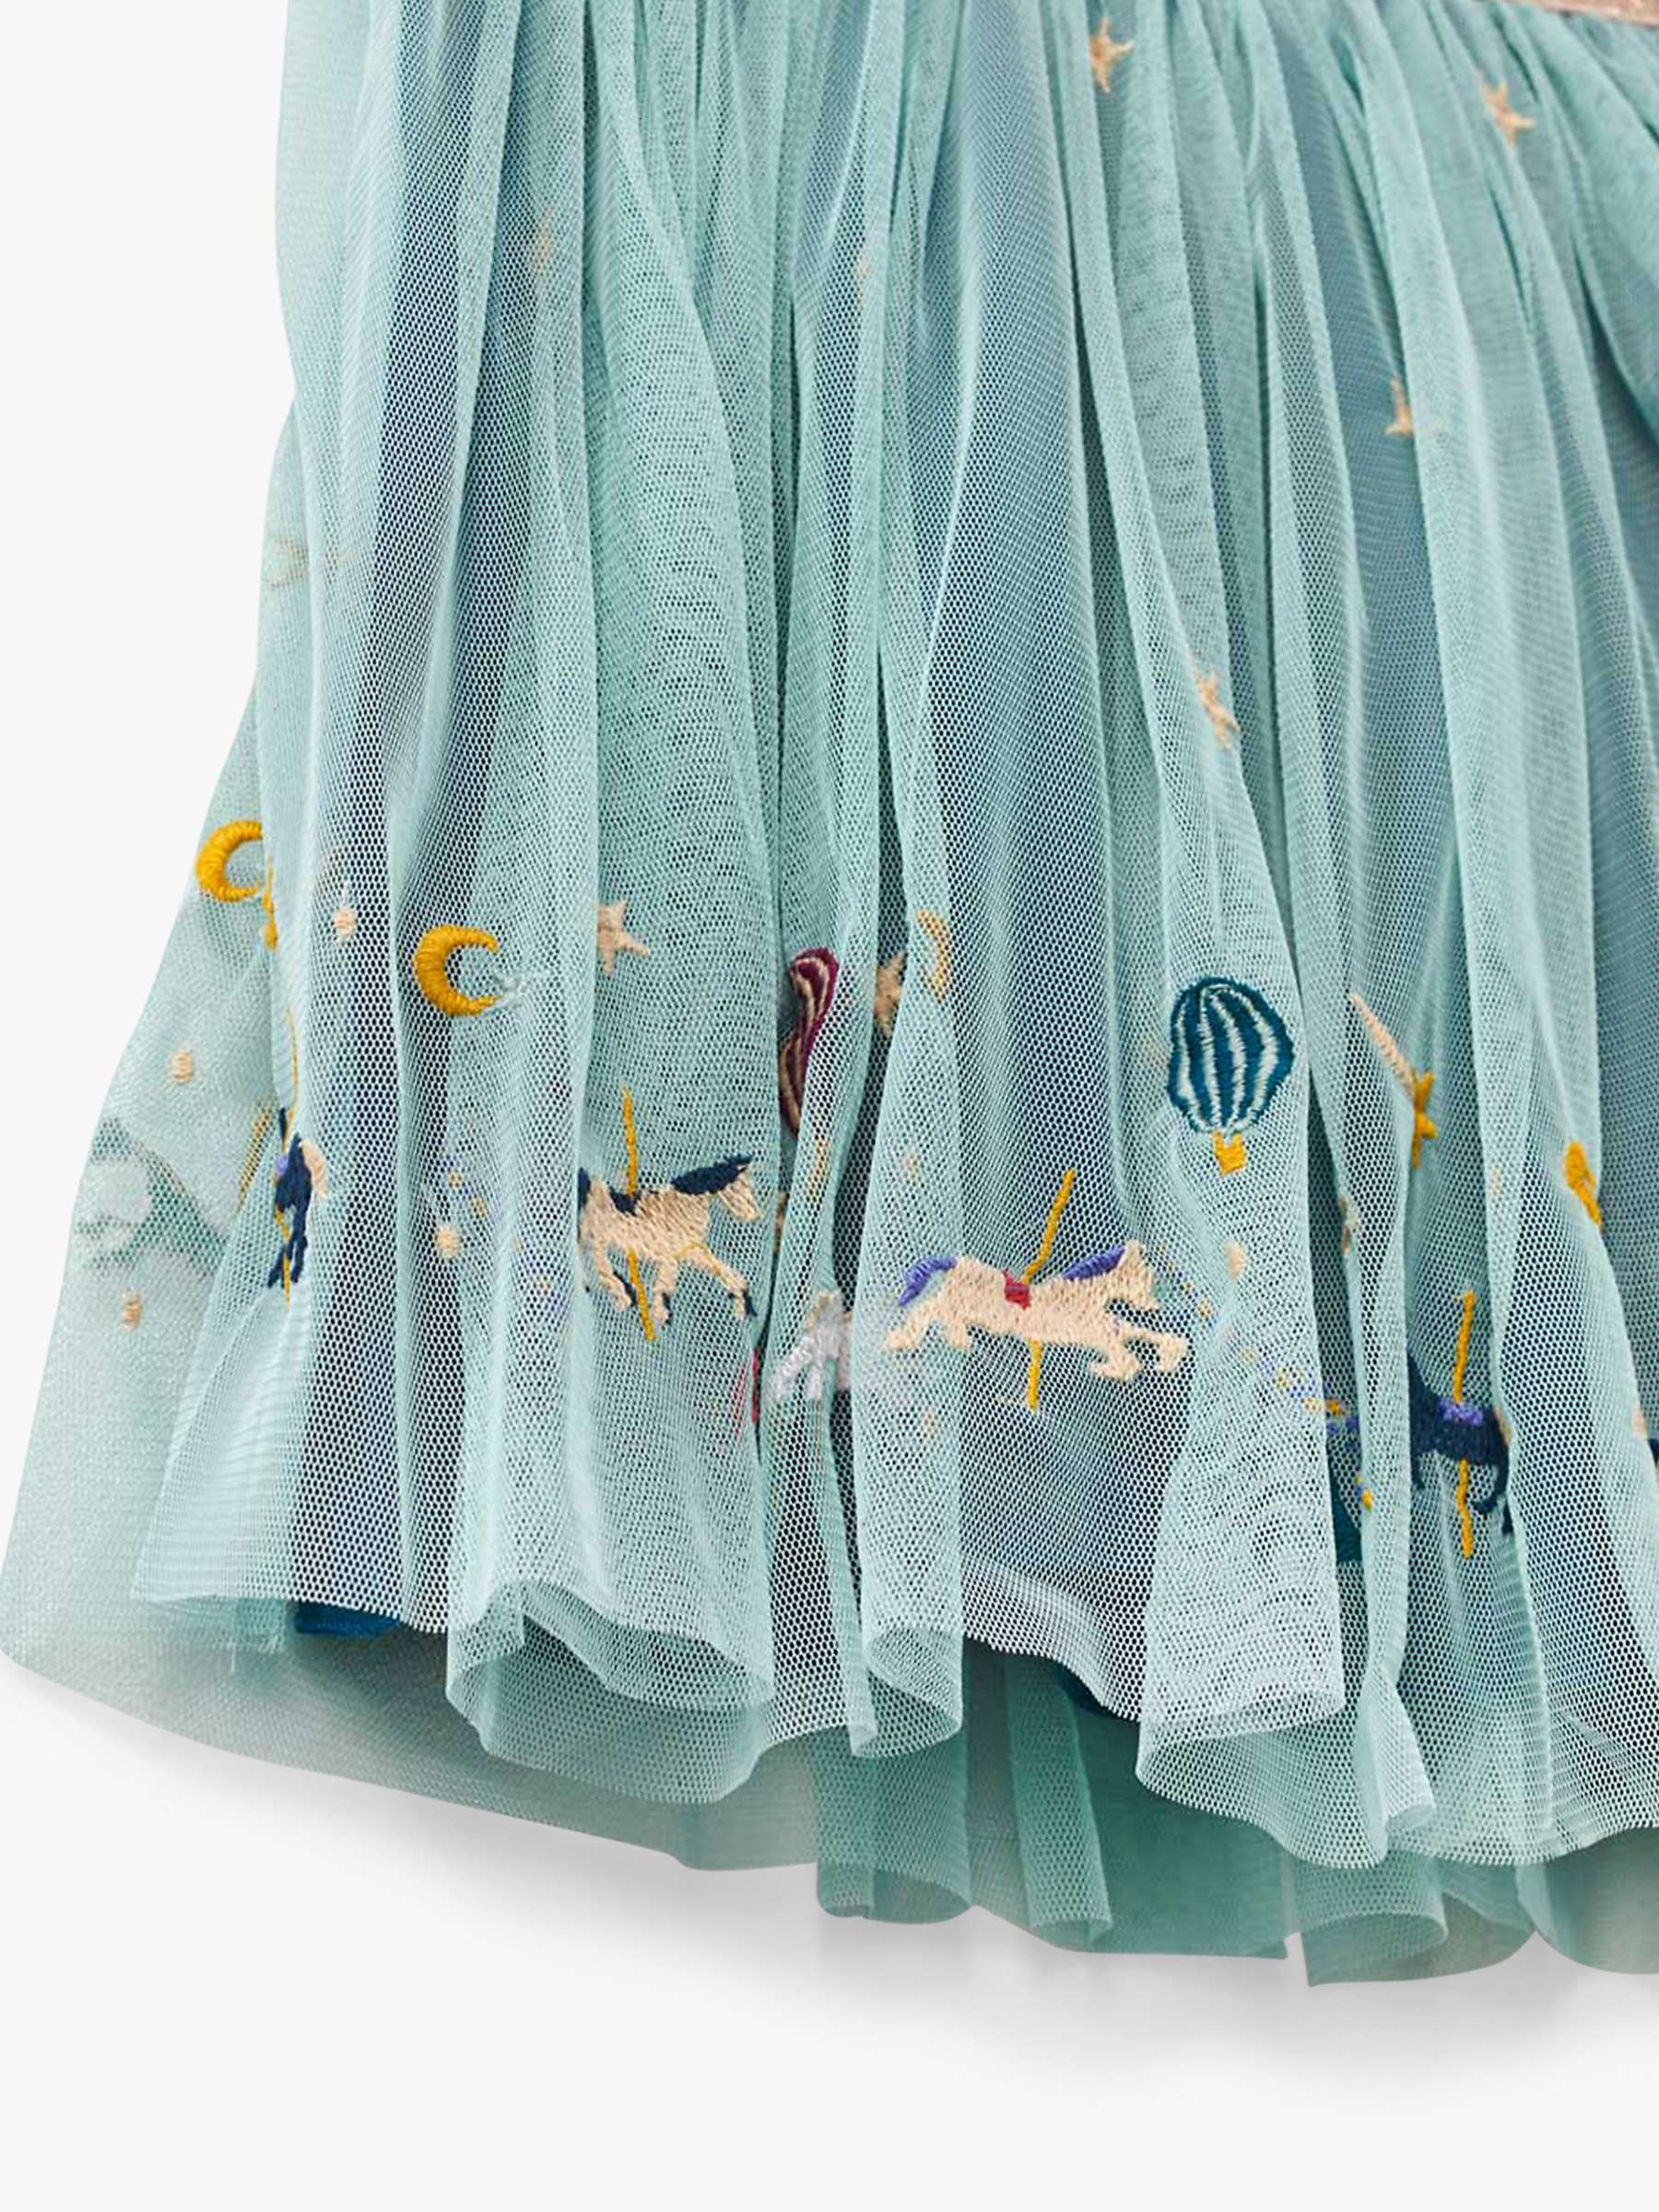 Buy Stych Kids' Once Upon A Time Tulle Skirt, Multi Online at johnlewis.com